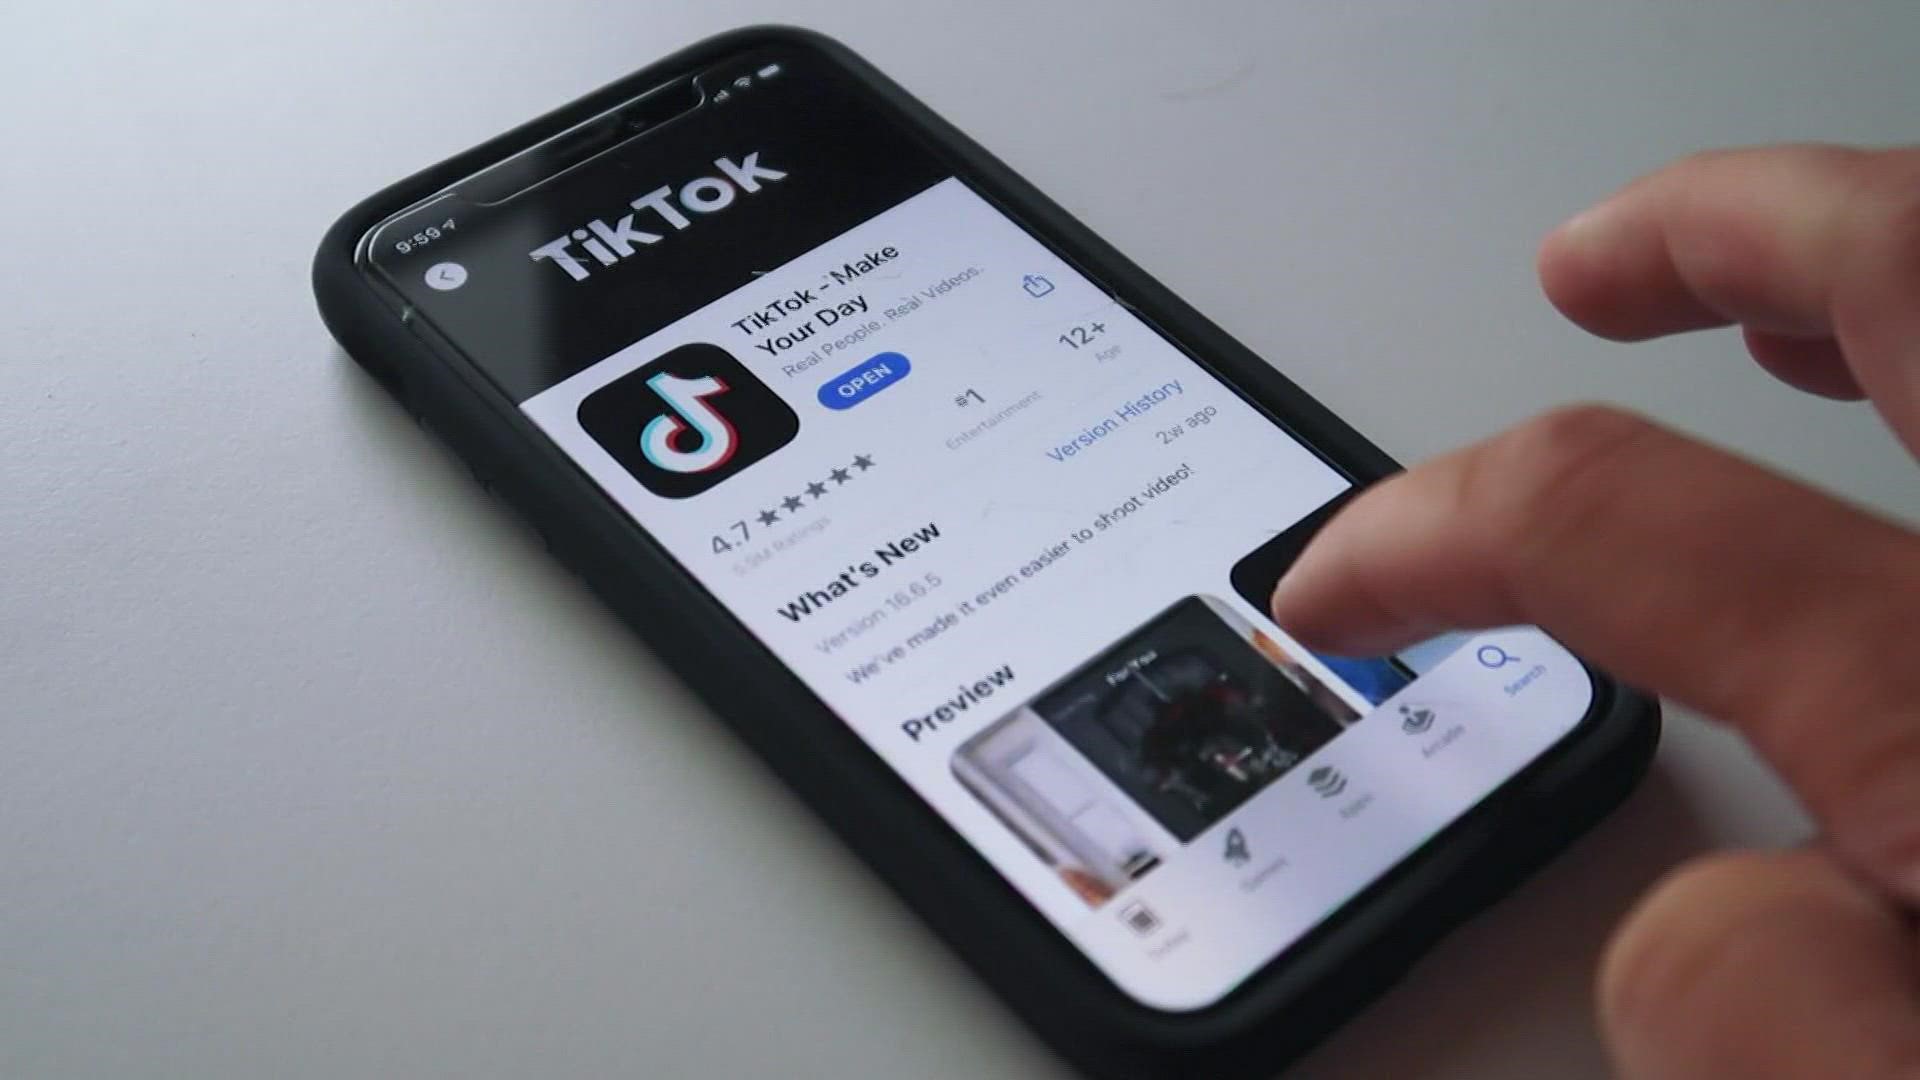 Colorado Representative Ken Buck, is backing a proposed bill that would ban TikTok from phones in the United States.